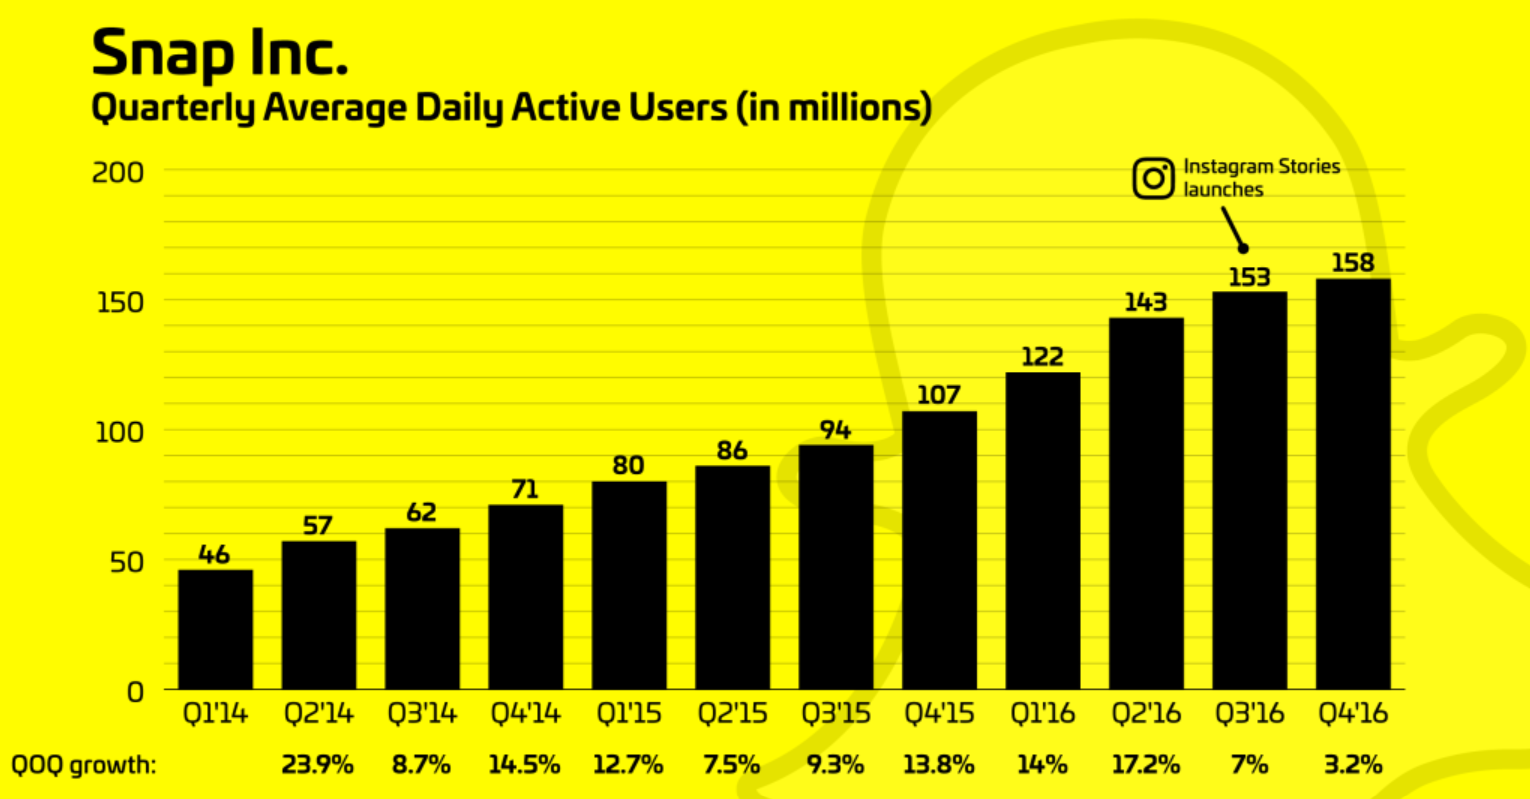 Snapchat's growth slowed down